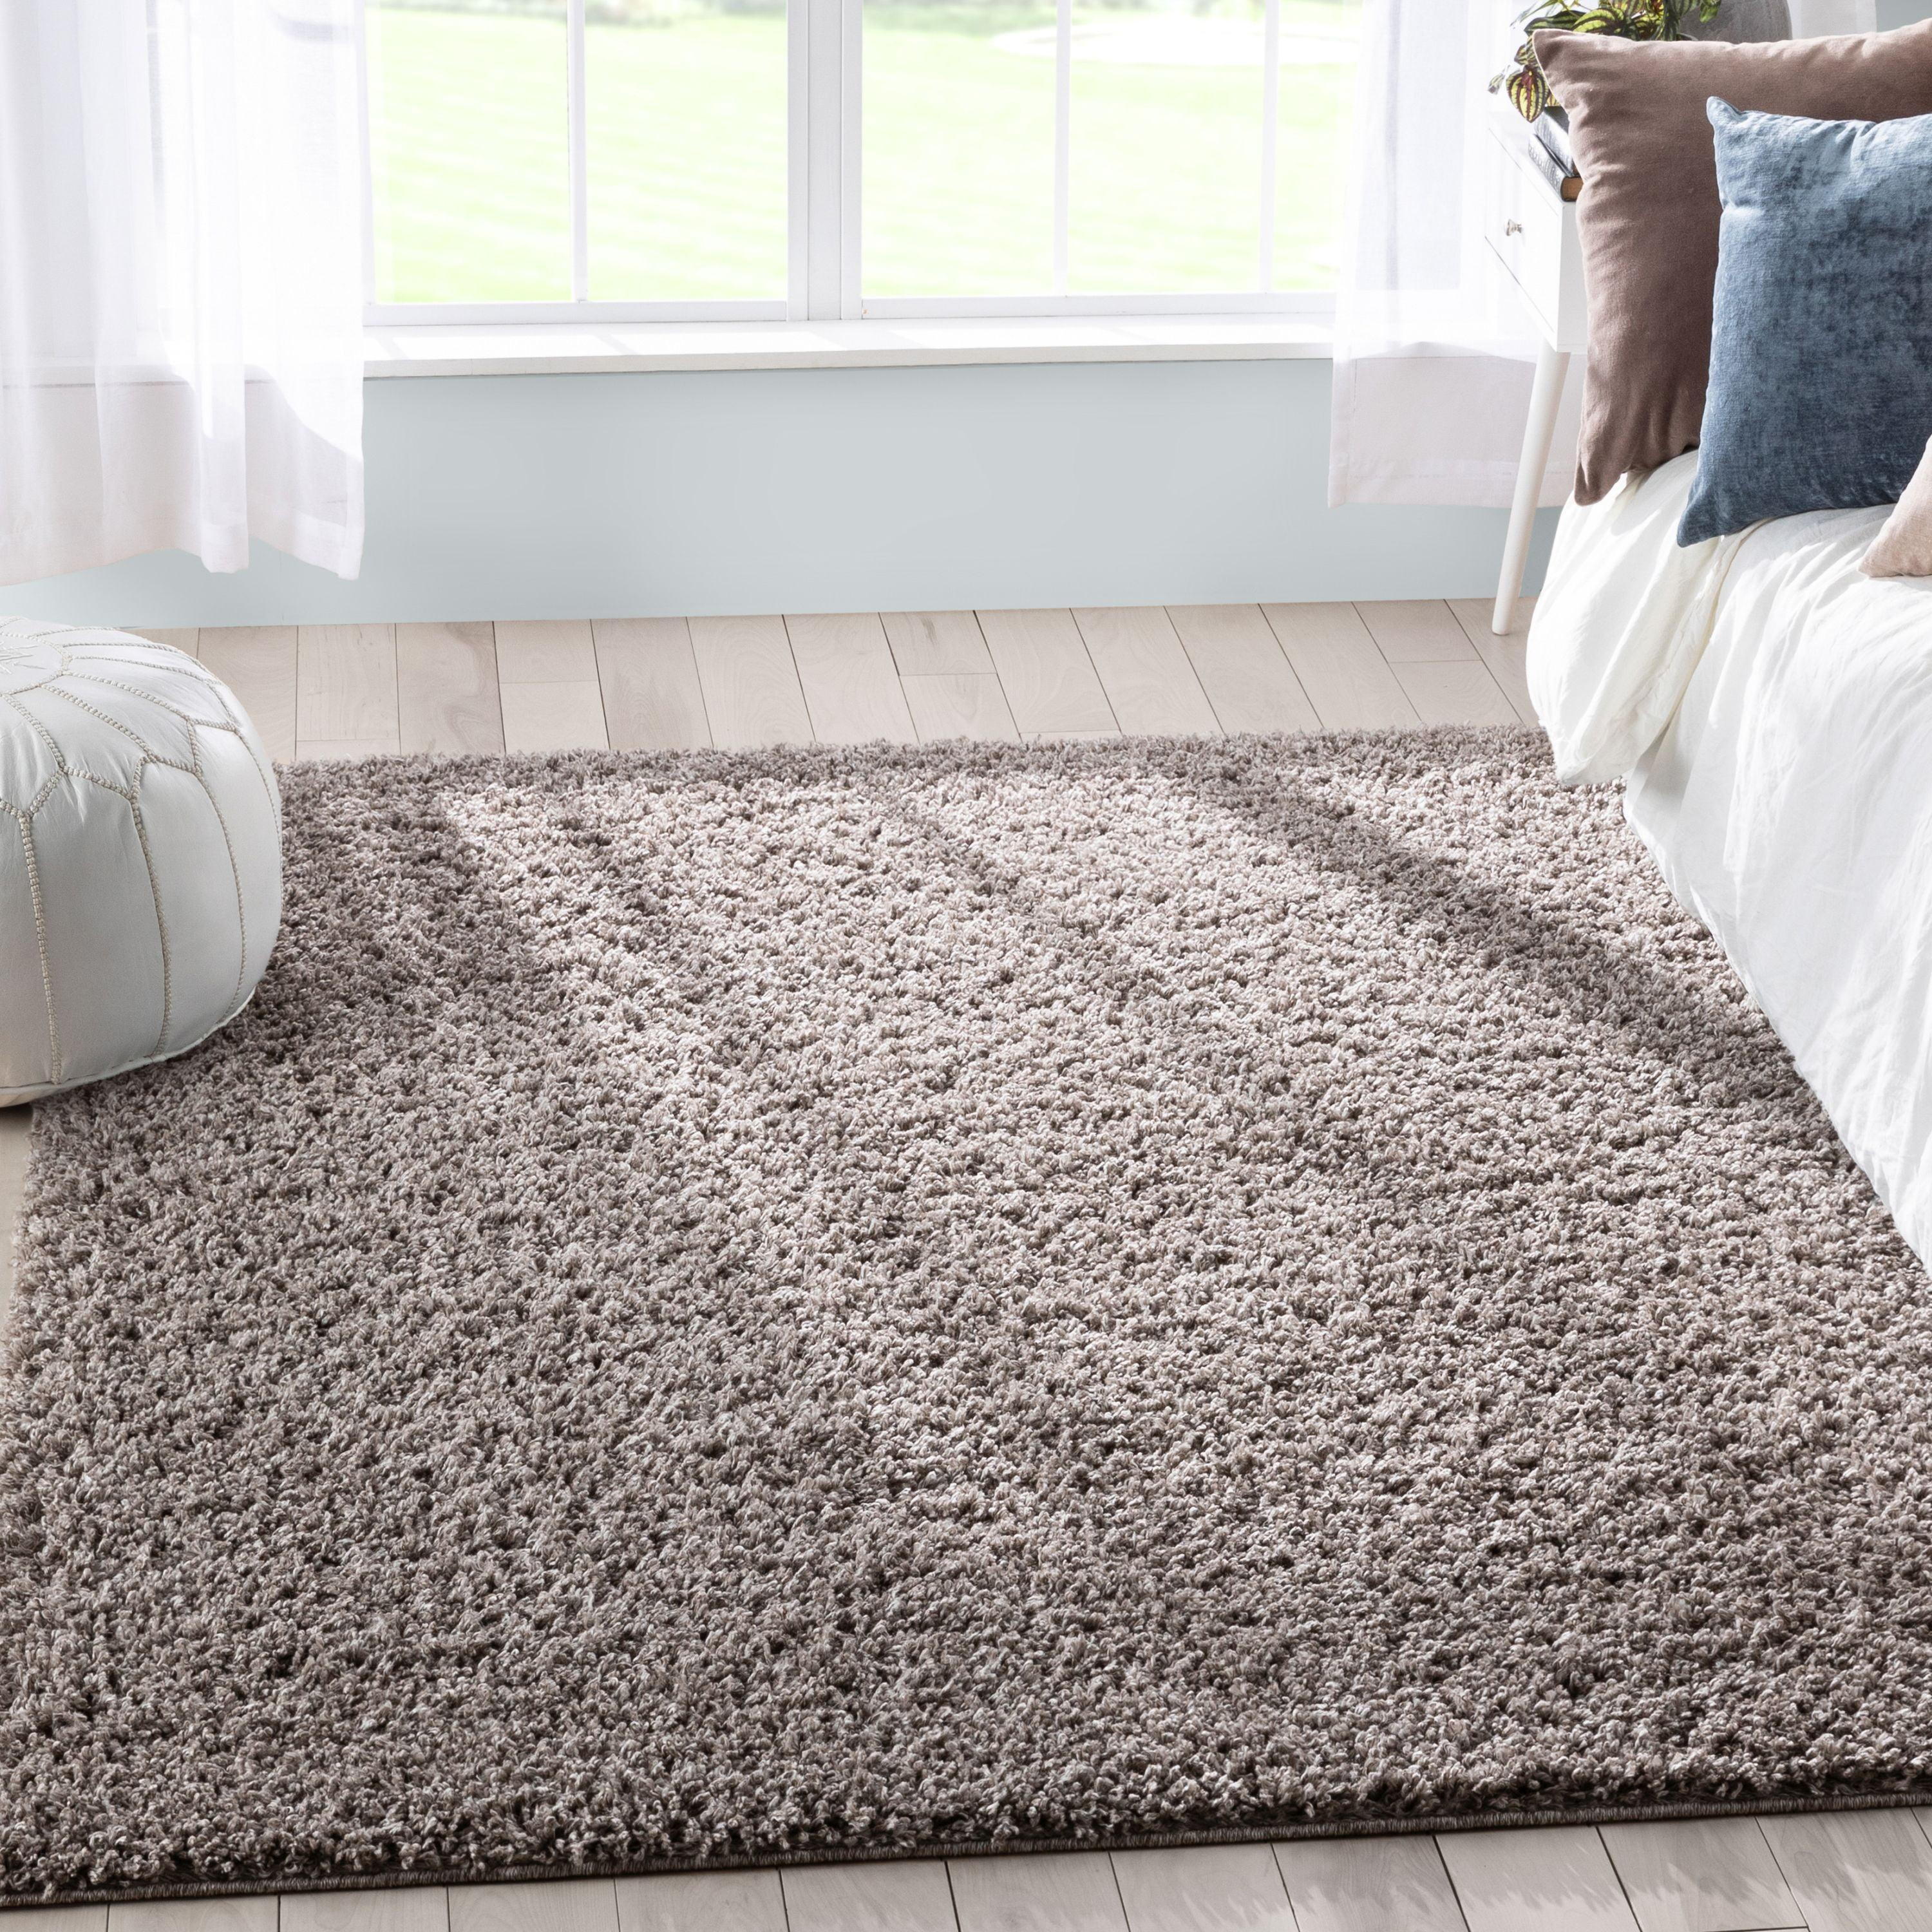 Luxurious Handmade Shag Rug in Beige, 8' x 10', Easy-Care Synthetic